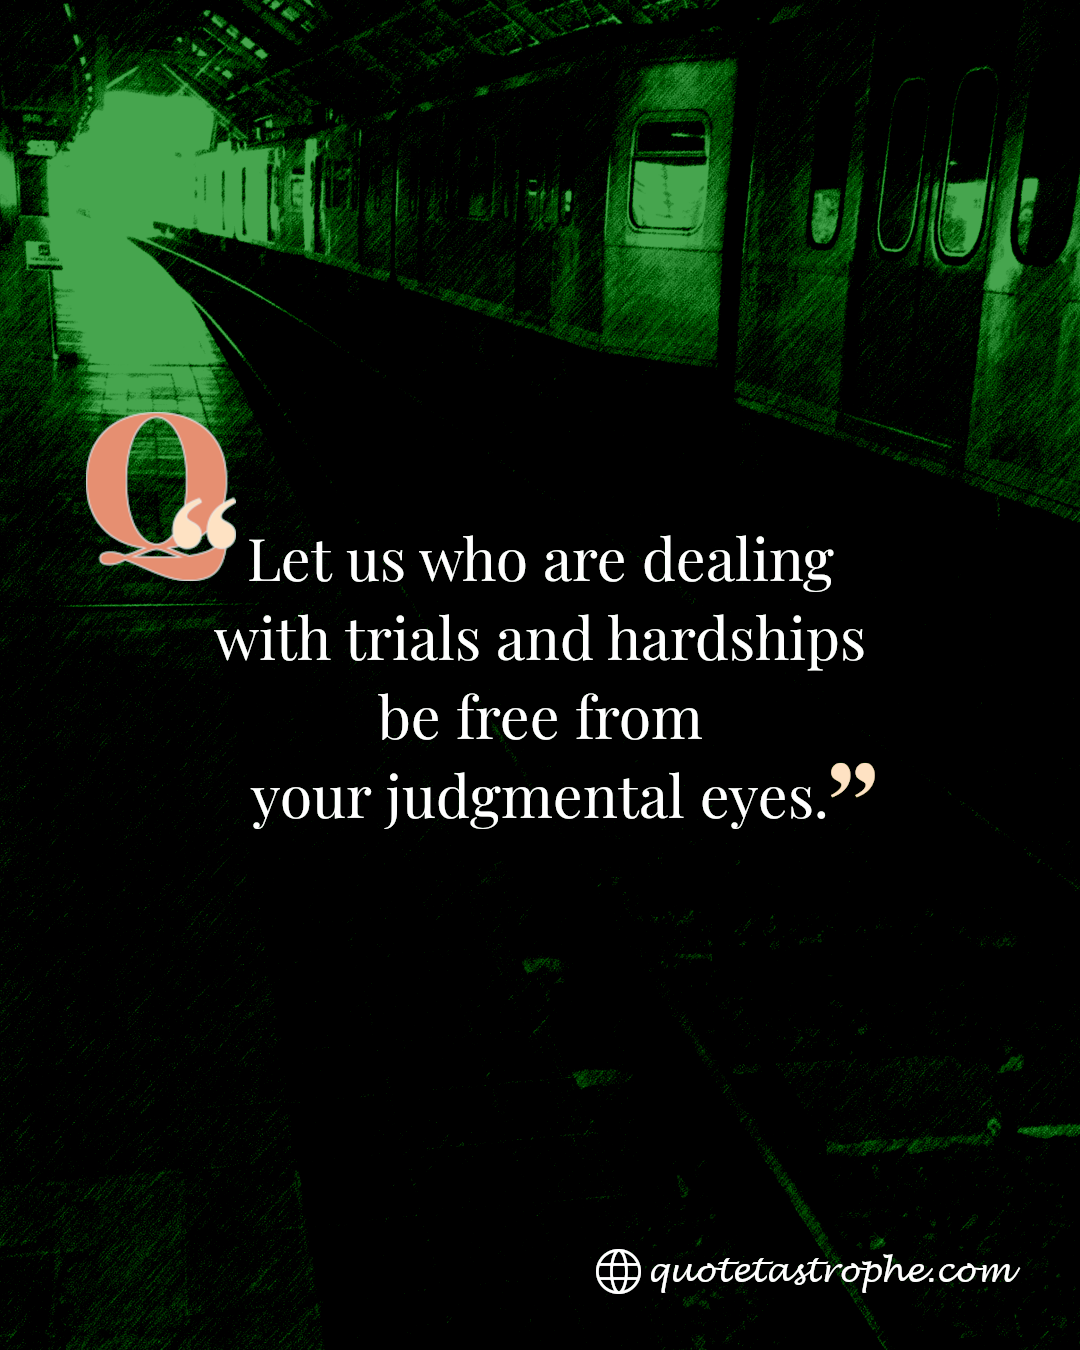 Let Us Who are Dealing With Trials and Hardships be Free